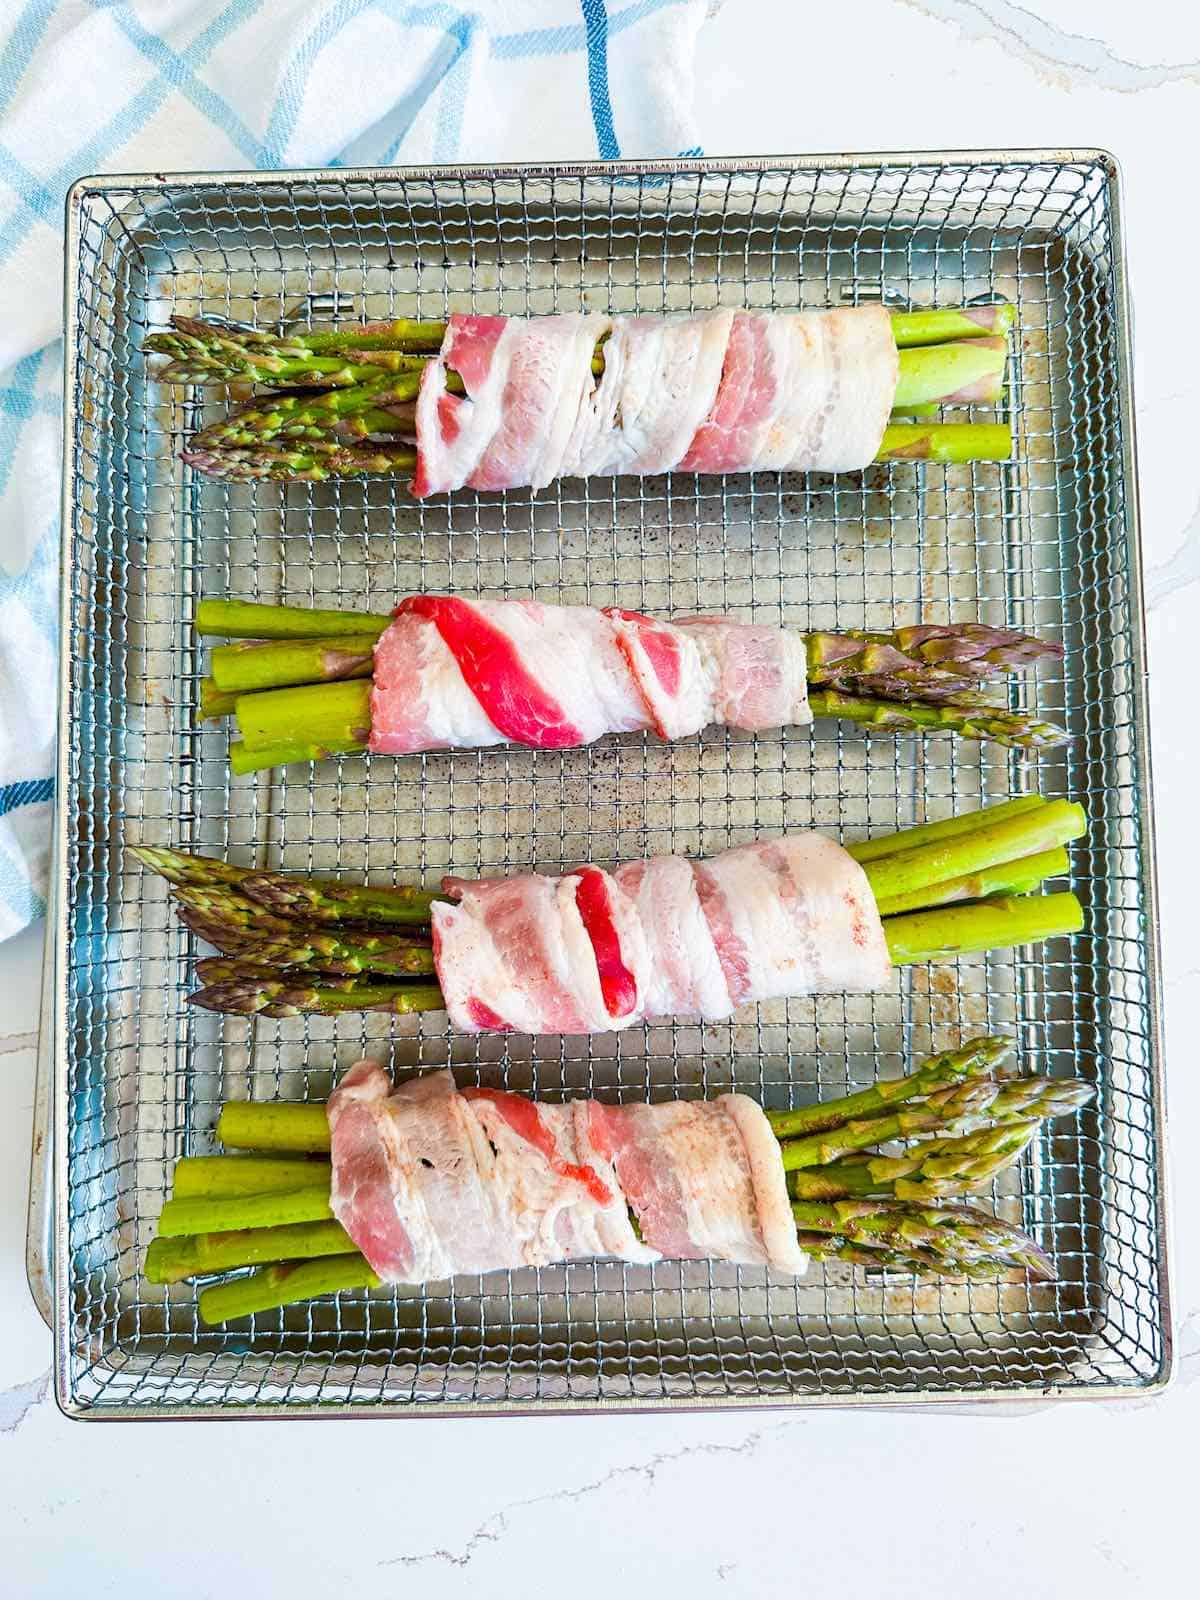 Bacon wrapped asparagus in an air fryer basket before cooking.